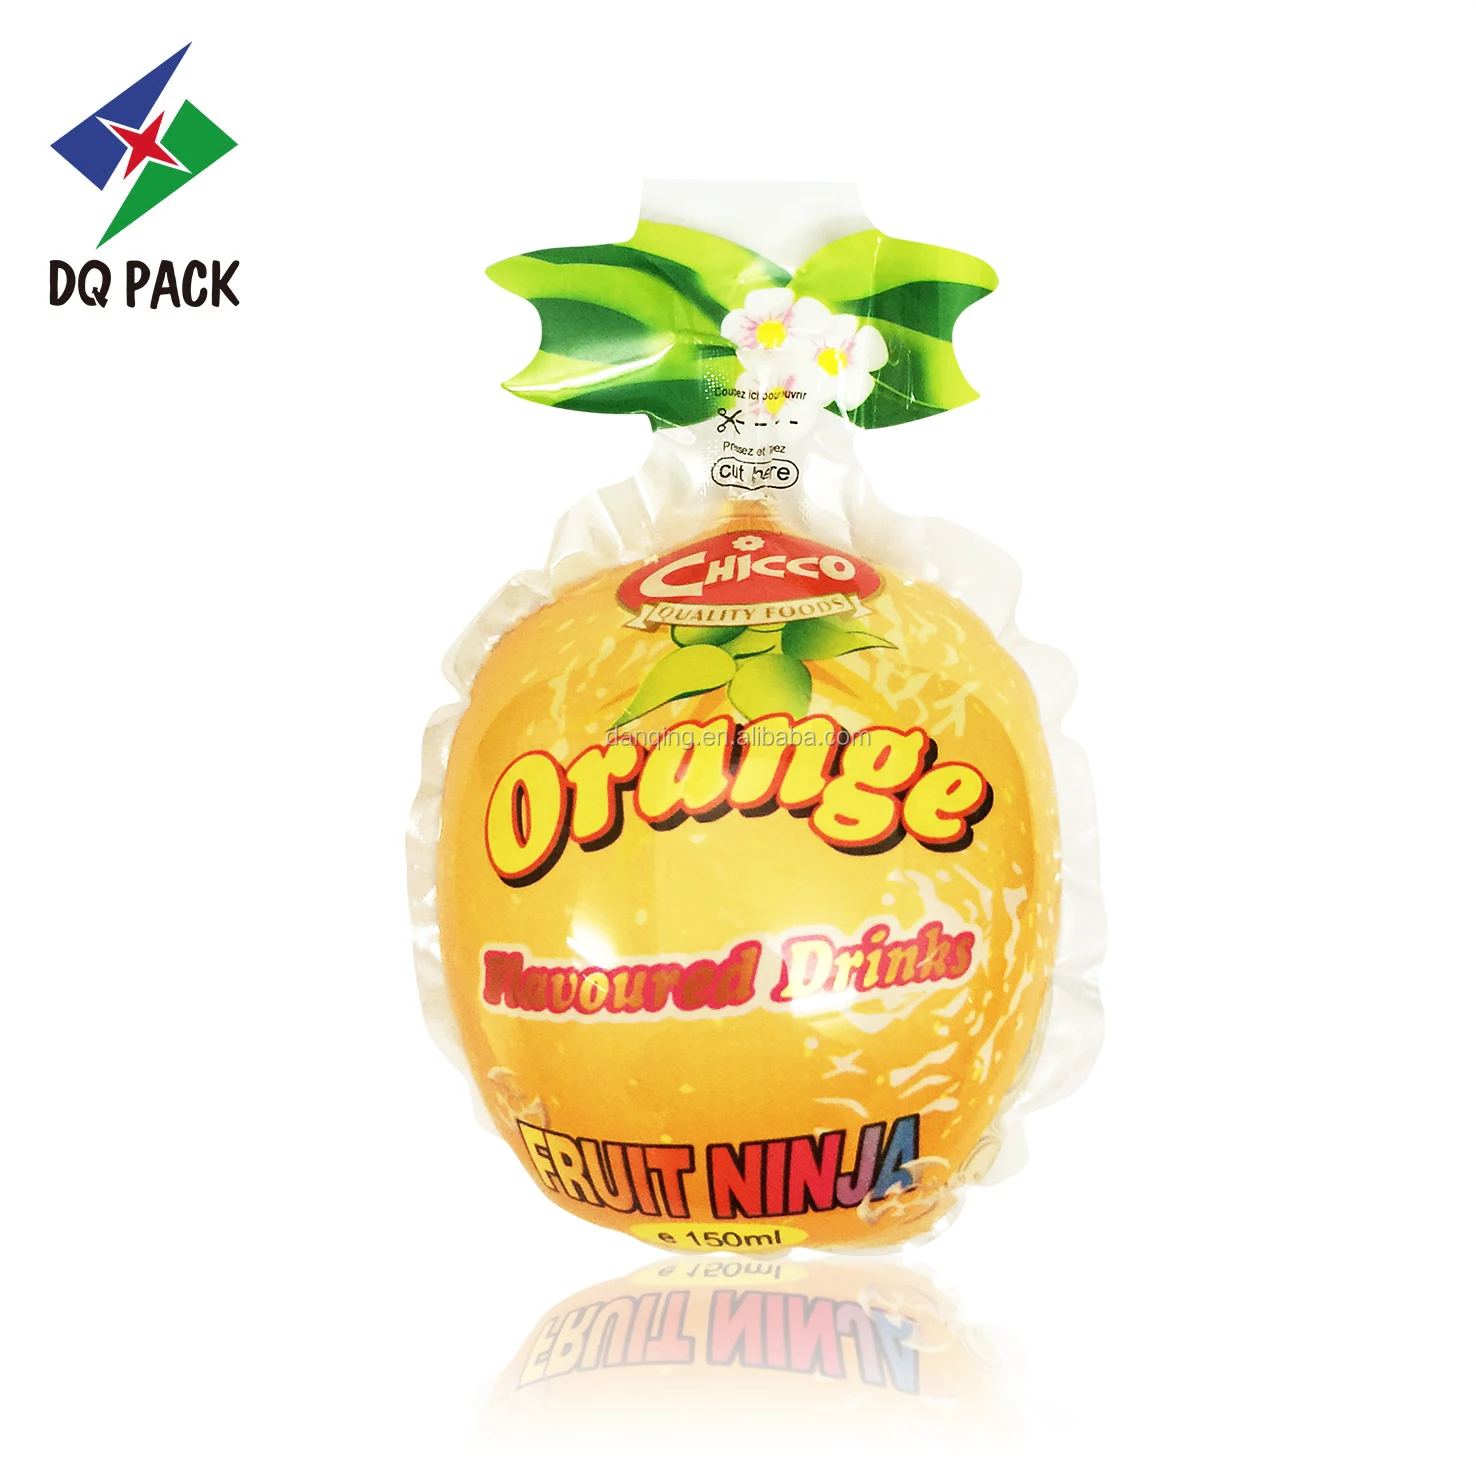 DQ PACK China manufacturer custom printed fruit juice injection pouch